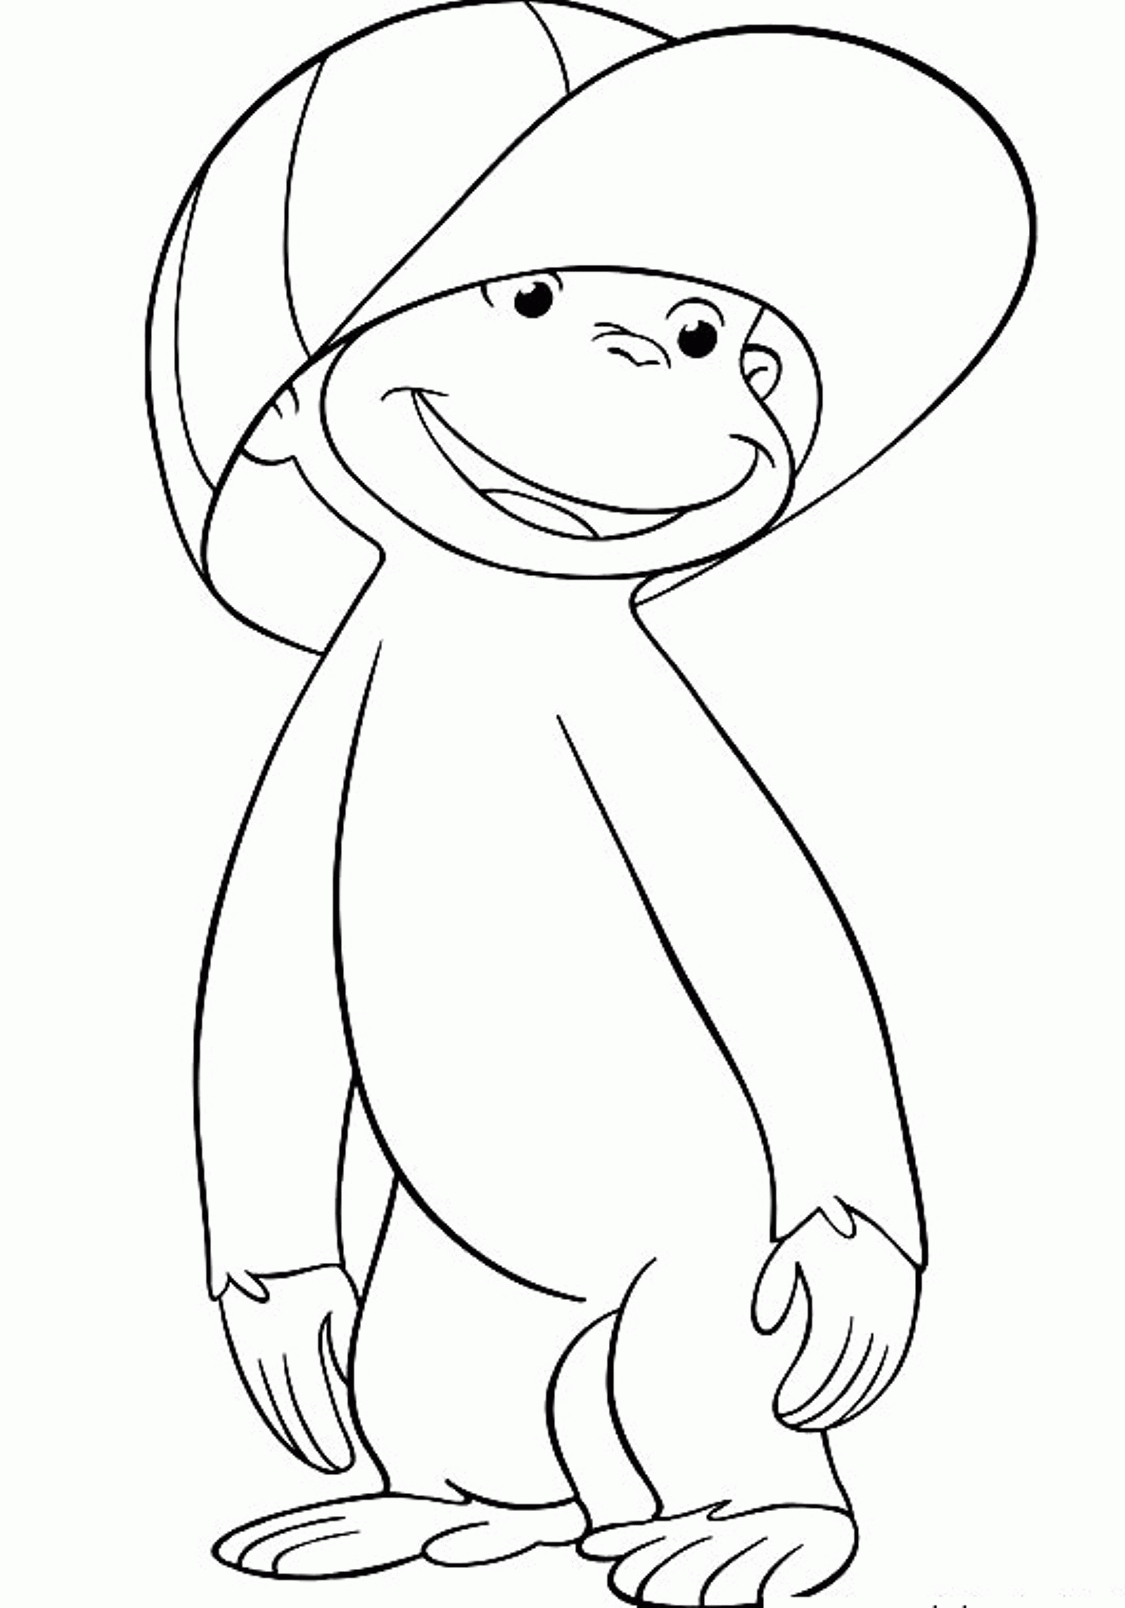 Wearing Hat Curious George Coloring Pages | Cartoon Coloring pages ...